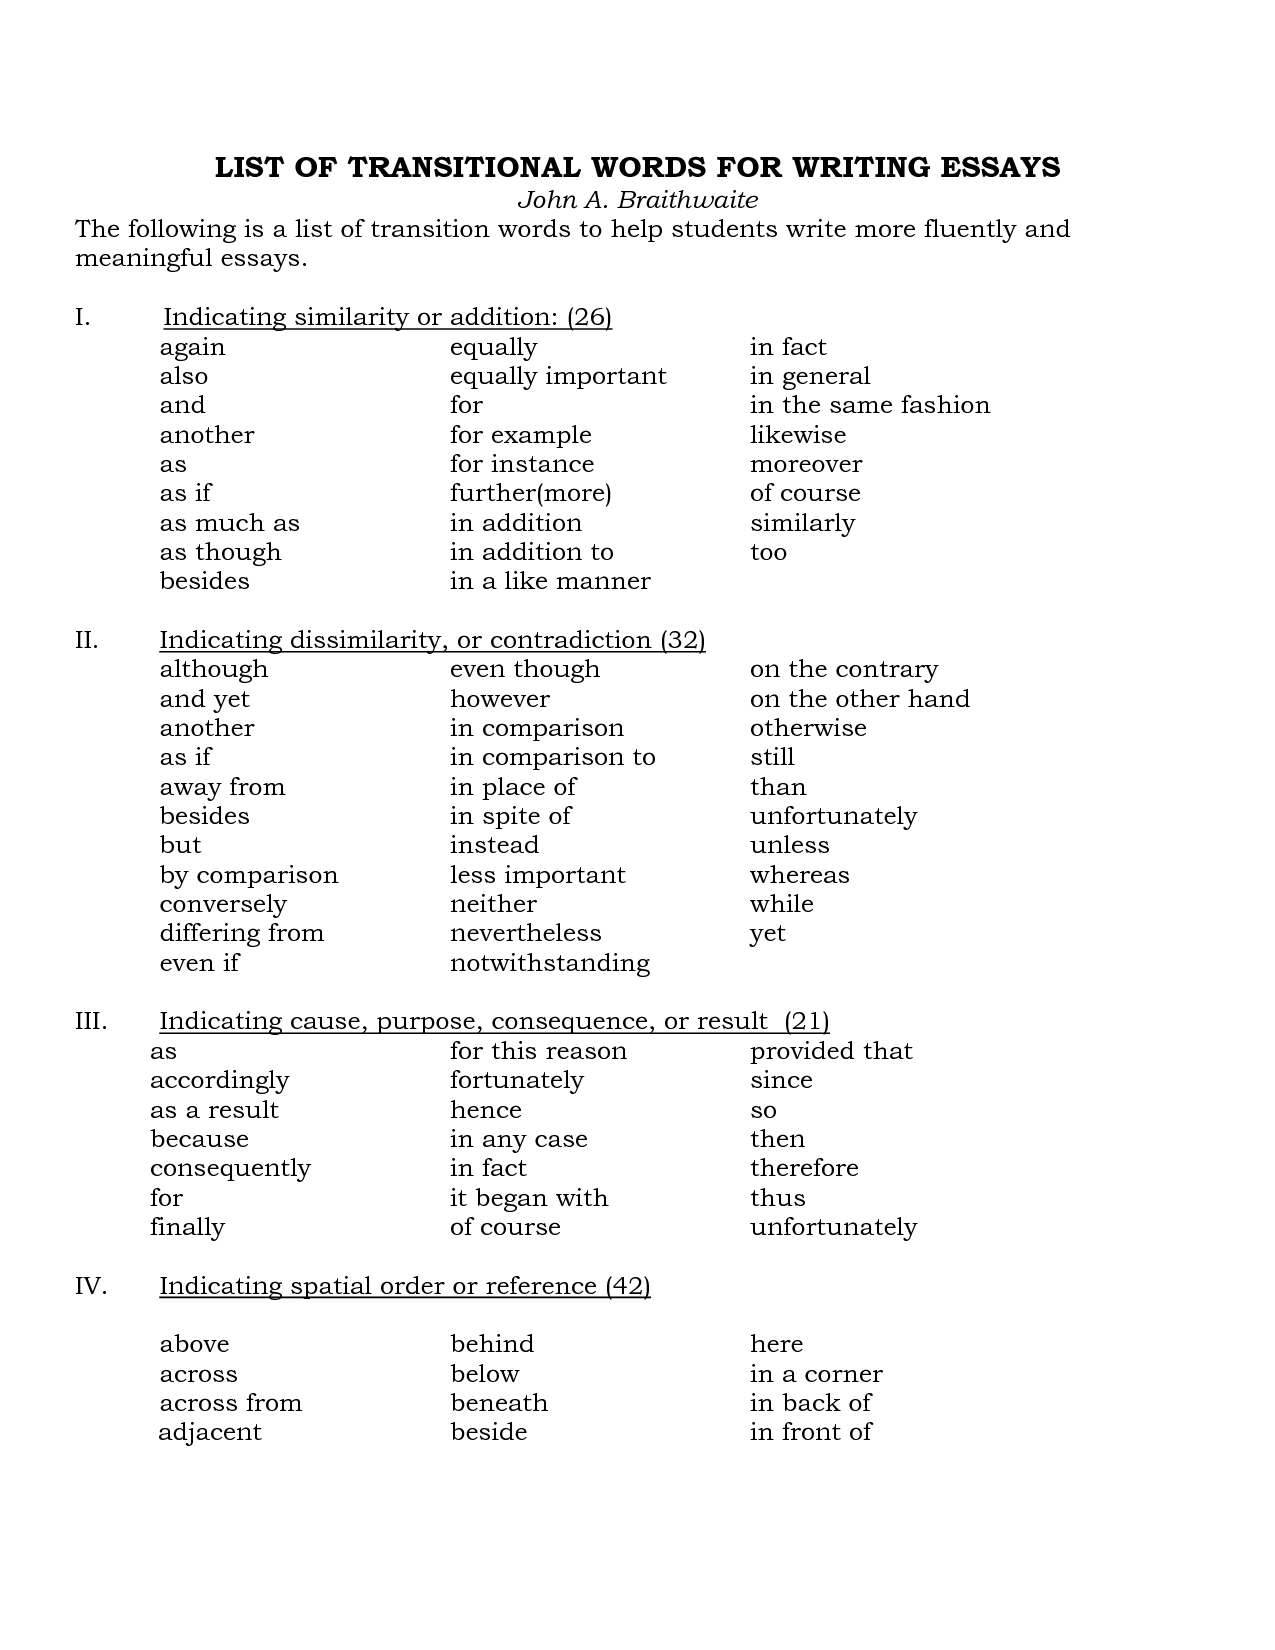 List of Transition Words for Writing Essays Image